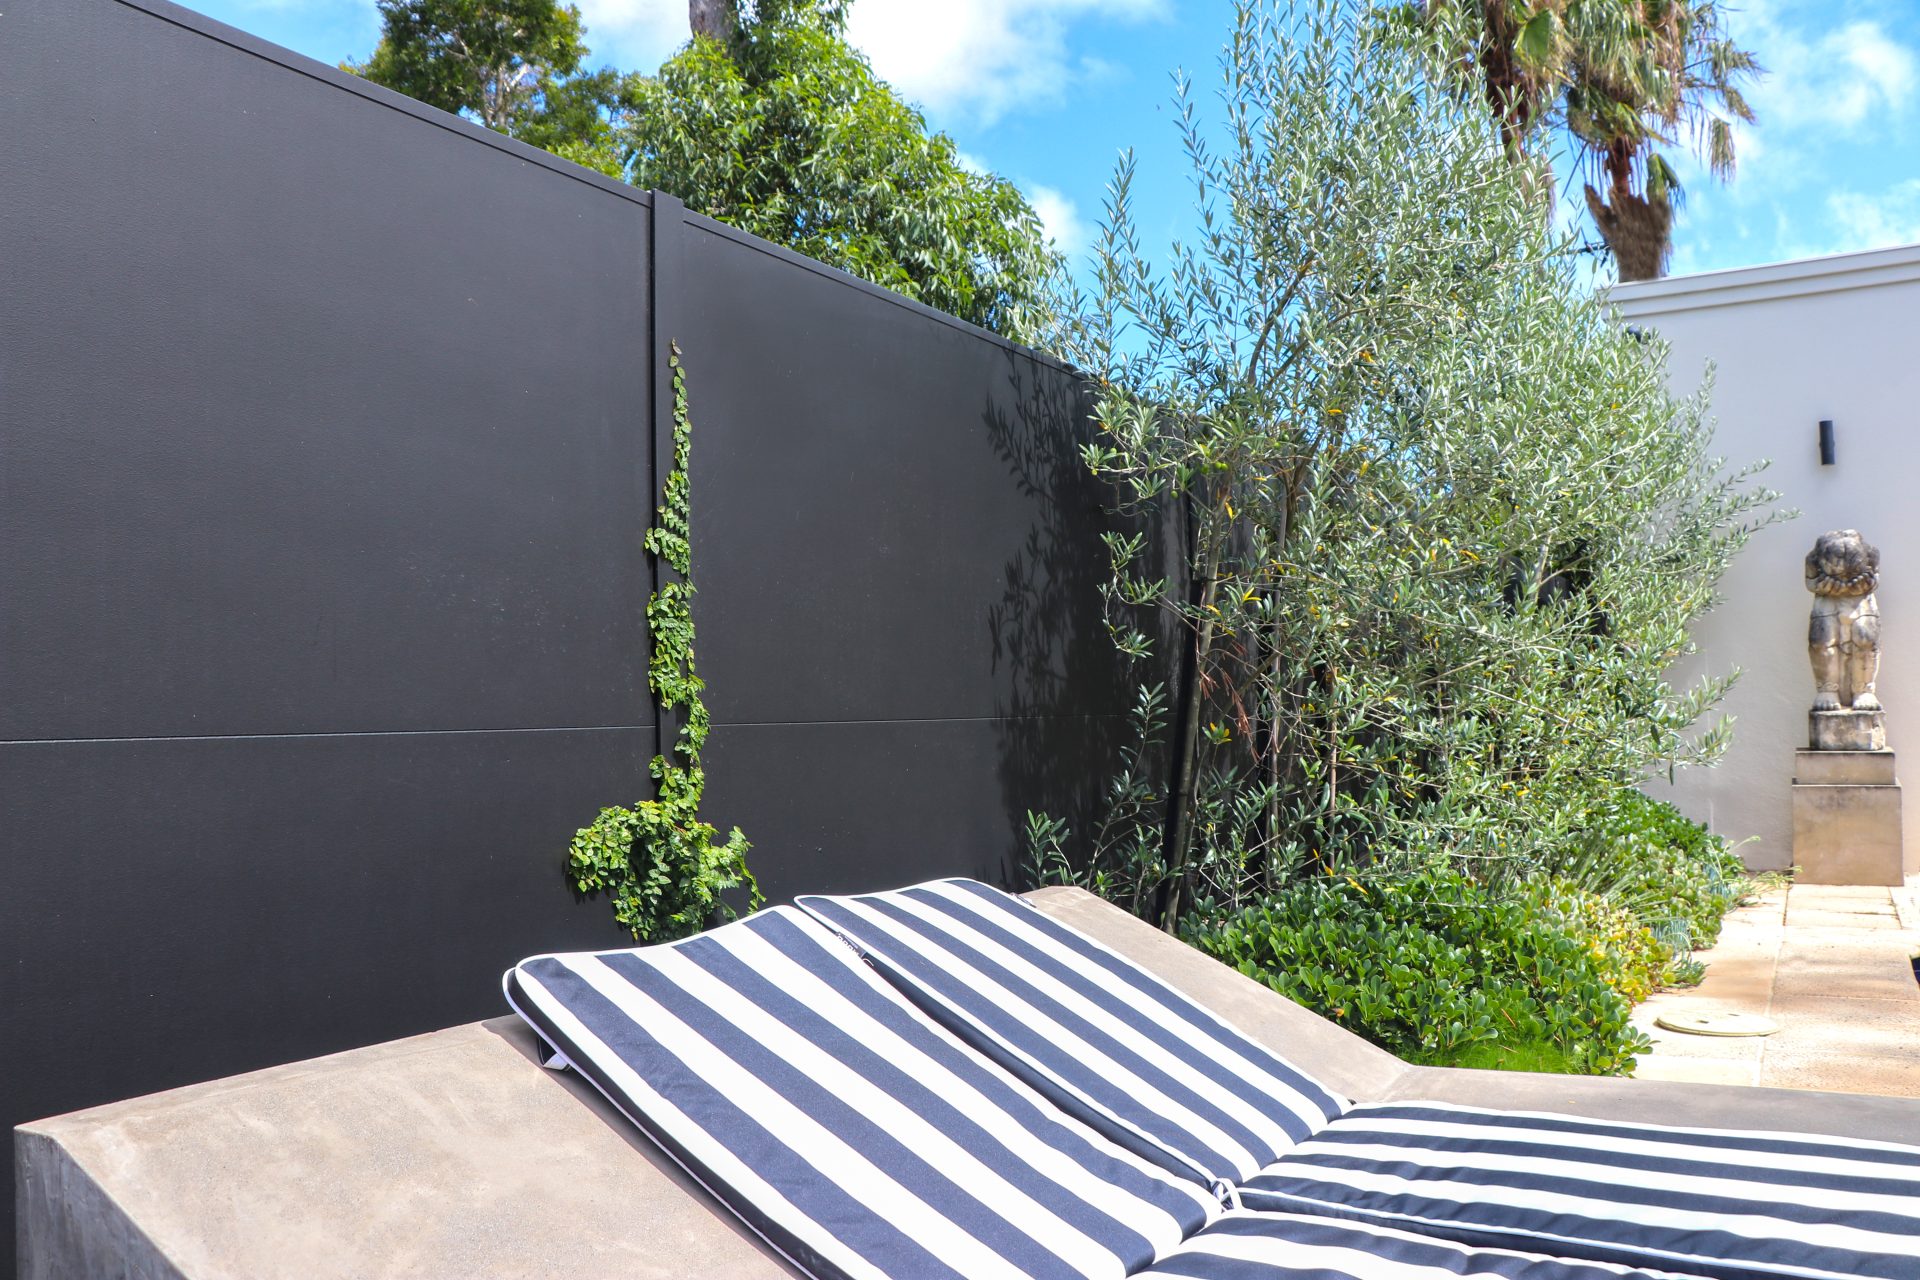 SlimWall with aluminium posts - The Perfect Privacy Fence